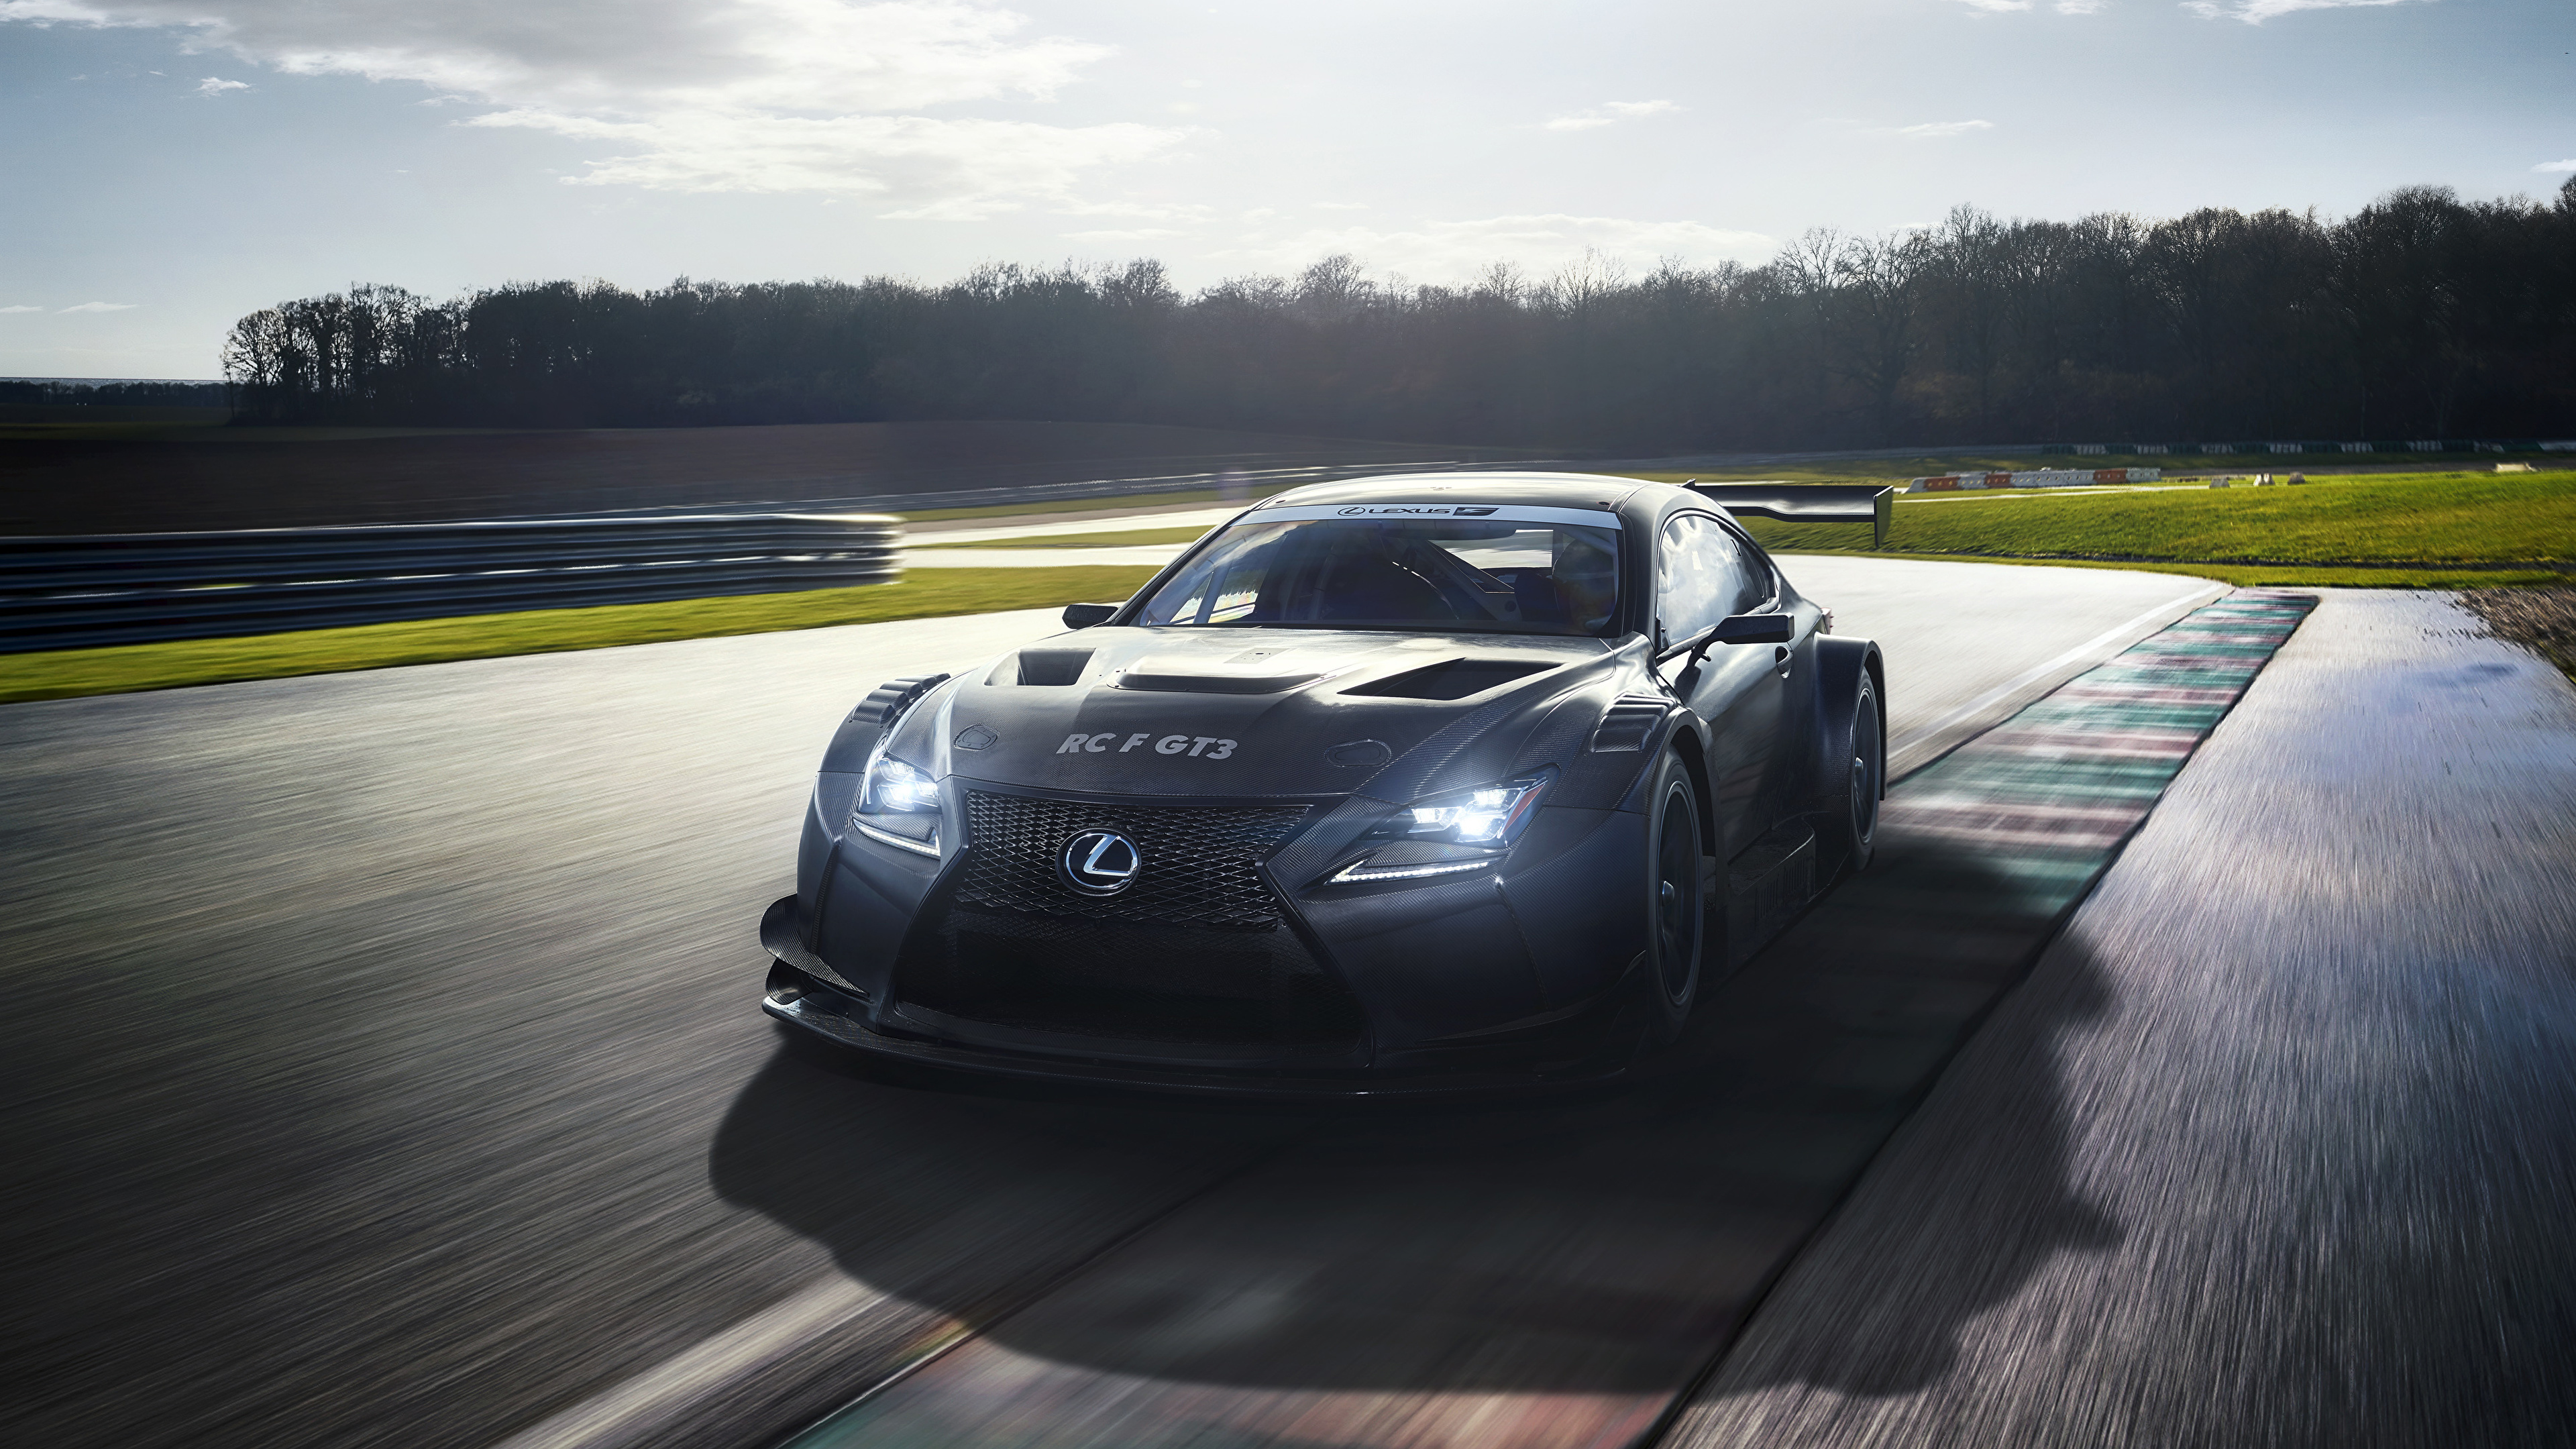 Pictures Lexus 17 Rc F Gt3 Moving Cars 3840x2160